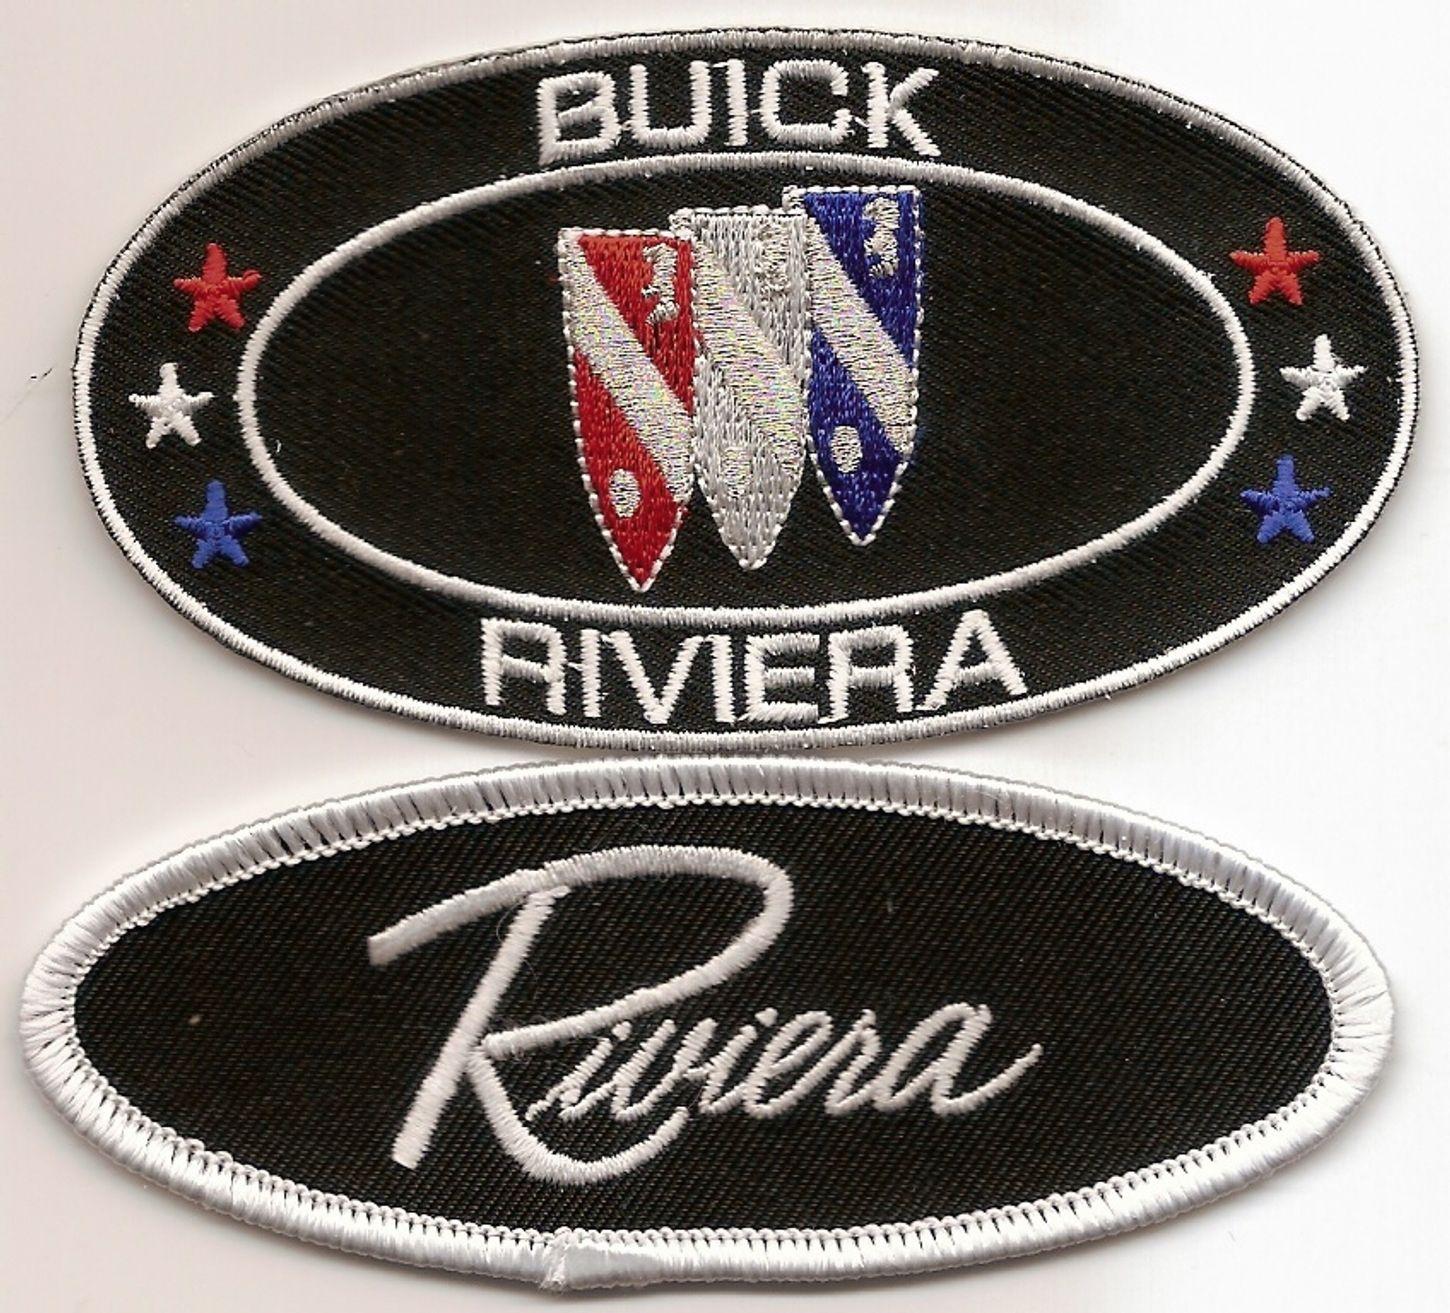 Old Buick Logo - Brand New BUICK Embroidery Logo Iron On Patch GMC Chevy Old Classic